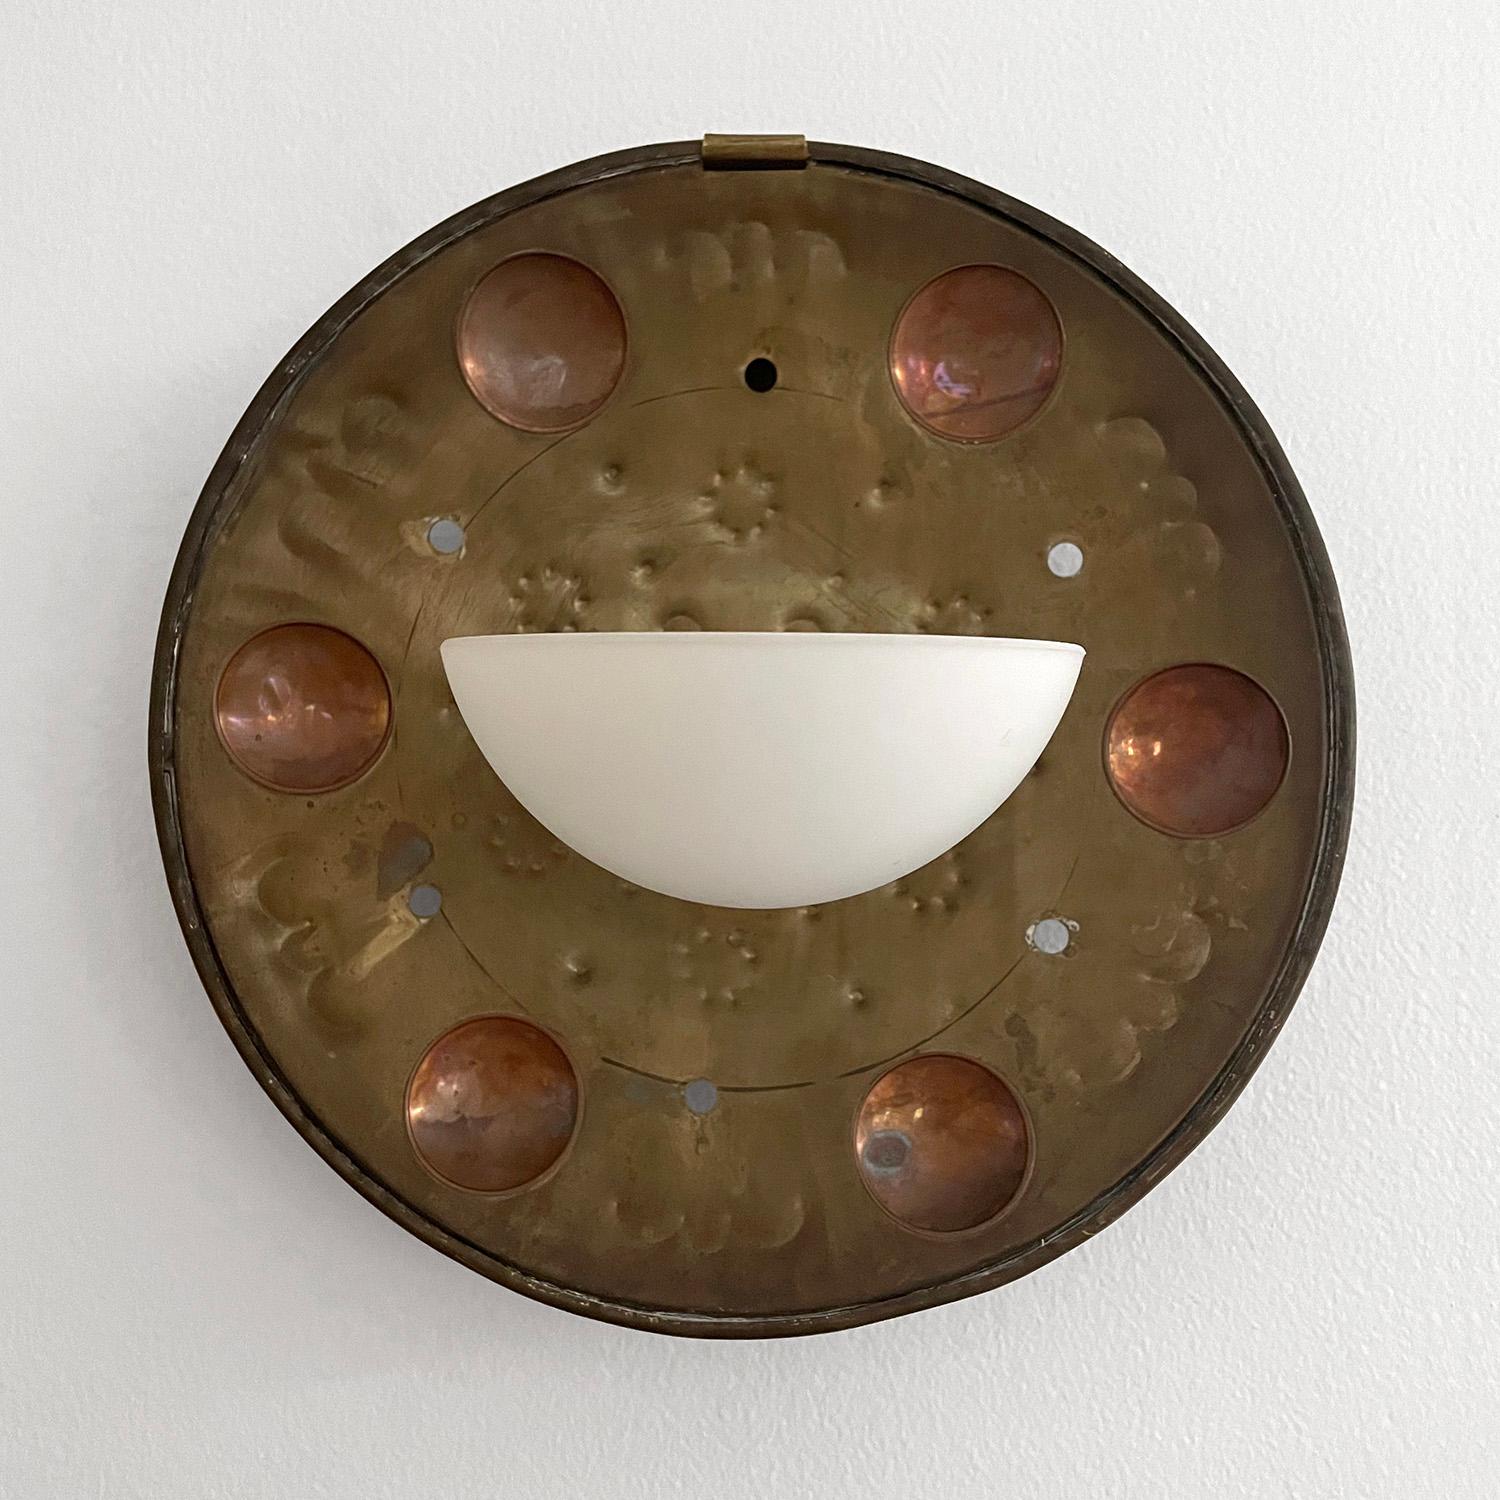 Scandinavian brass & copper wall sconce
Handcrafted rustic brass sconce with copper accents
Frosted milky glass shade has a small flea bite on the interior around the light socket 
Not visible when installed, please reference photo 
Patina from